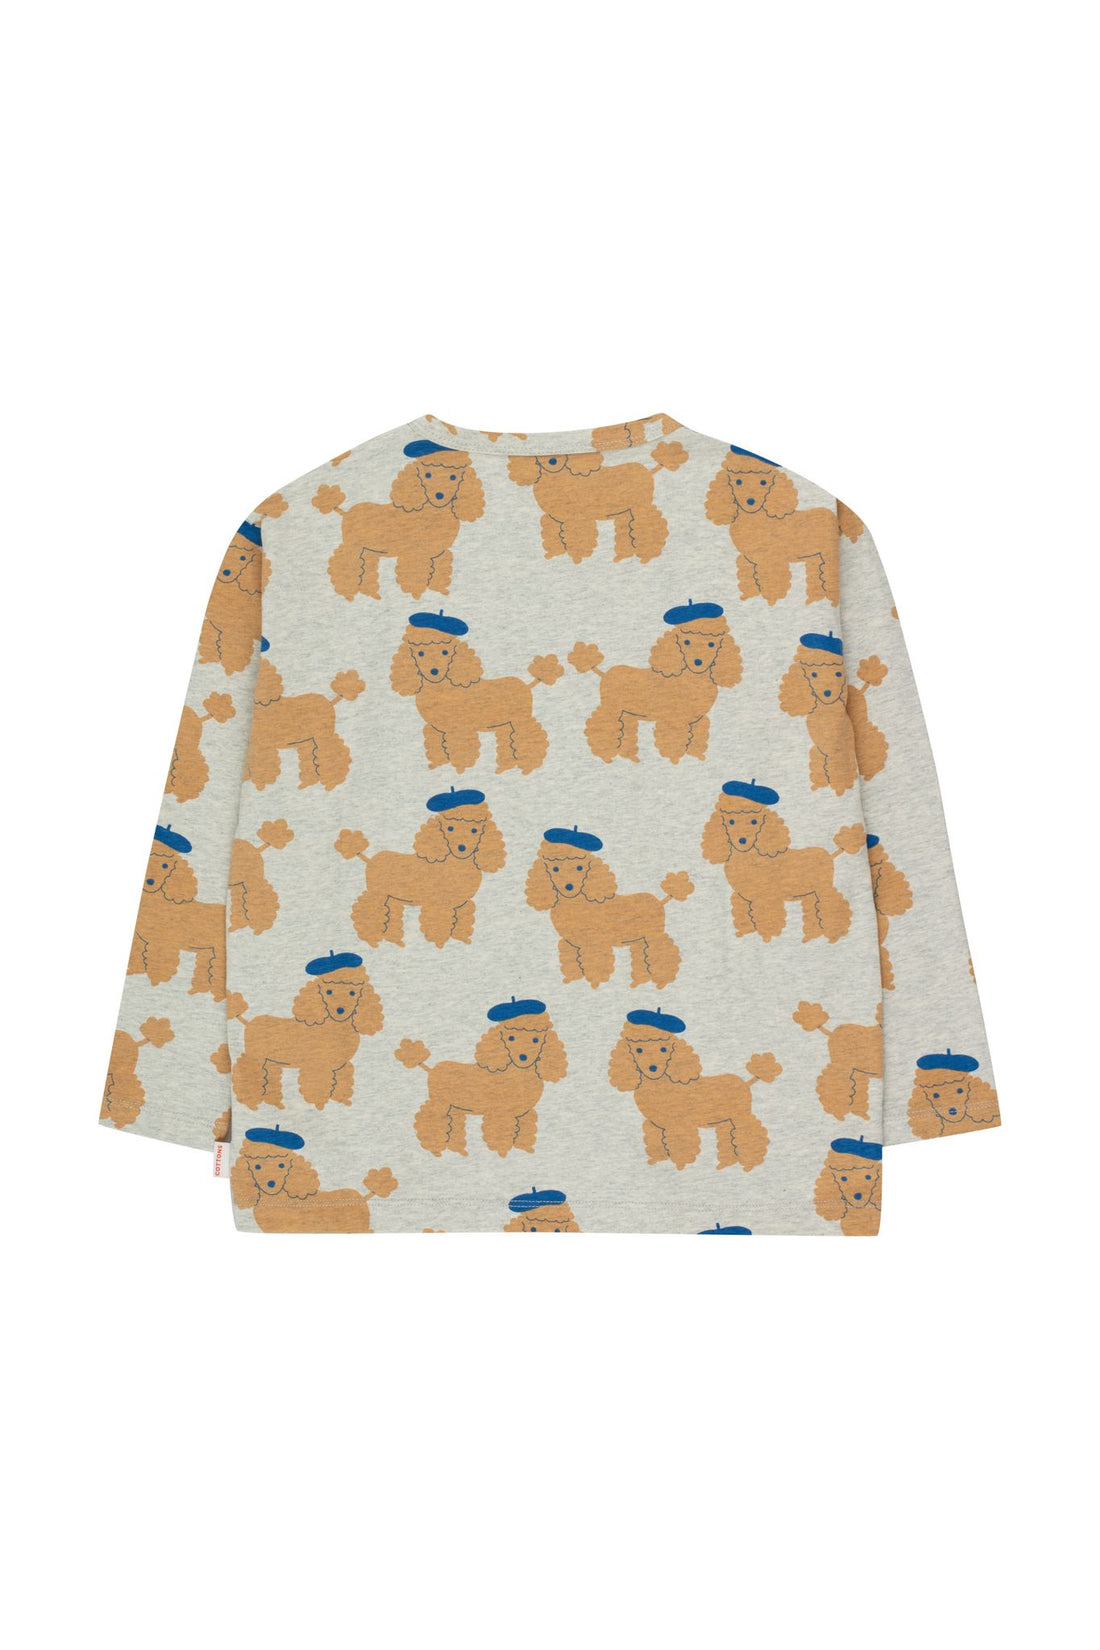 Tiny Cottons - poodle tee - light grey heather